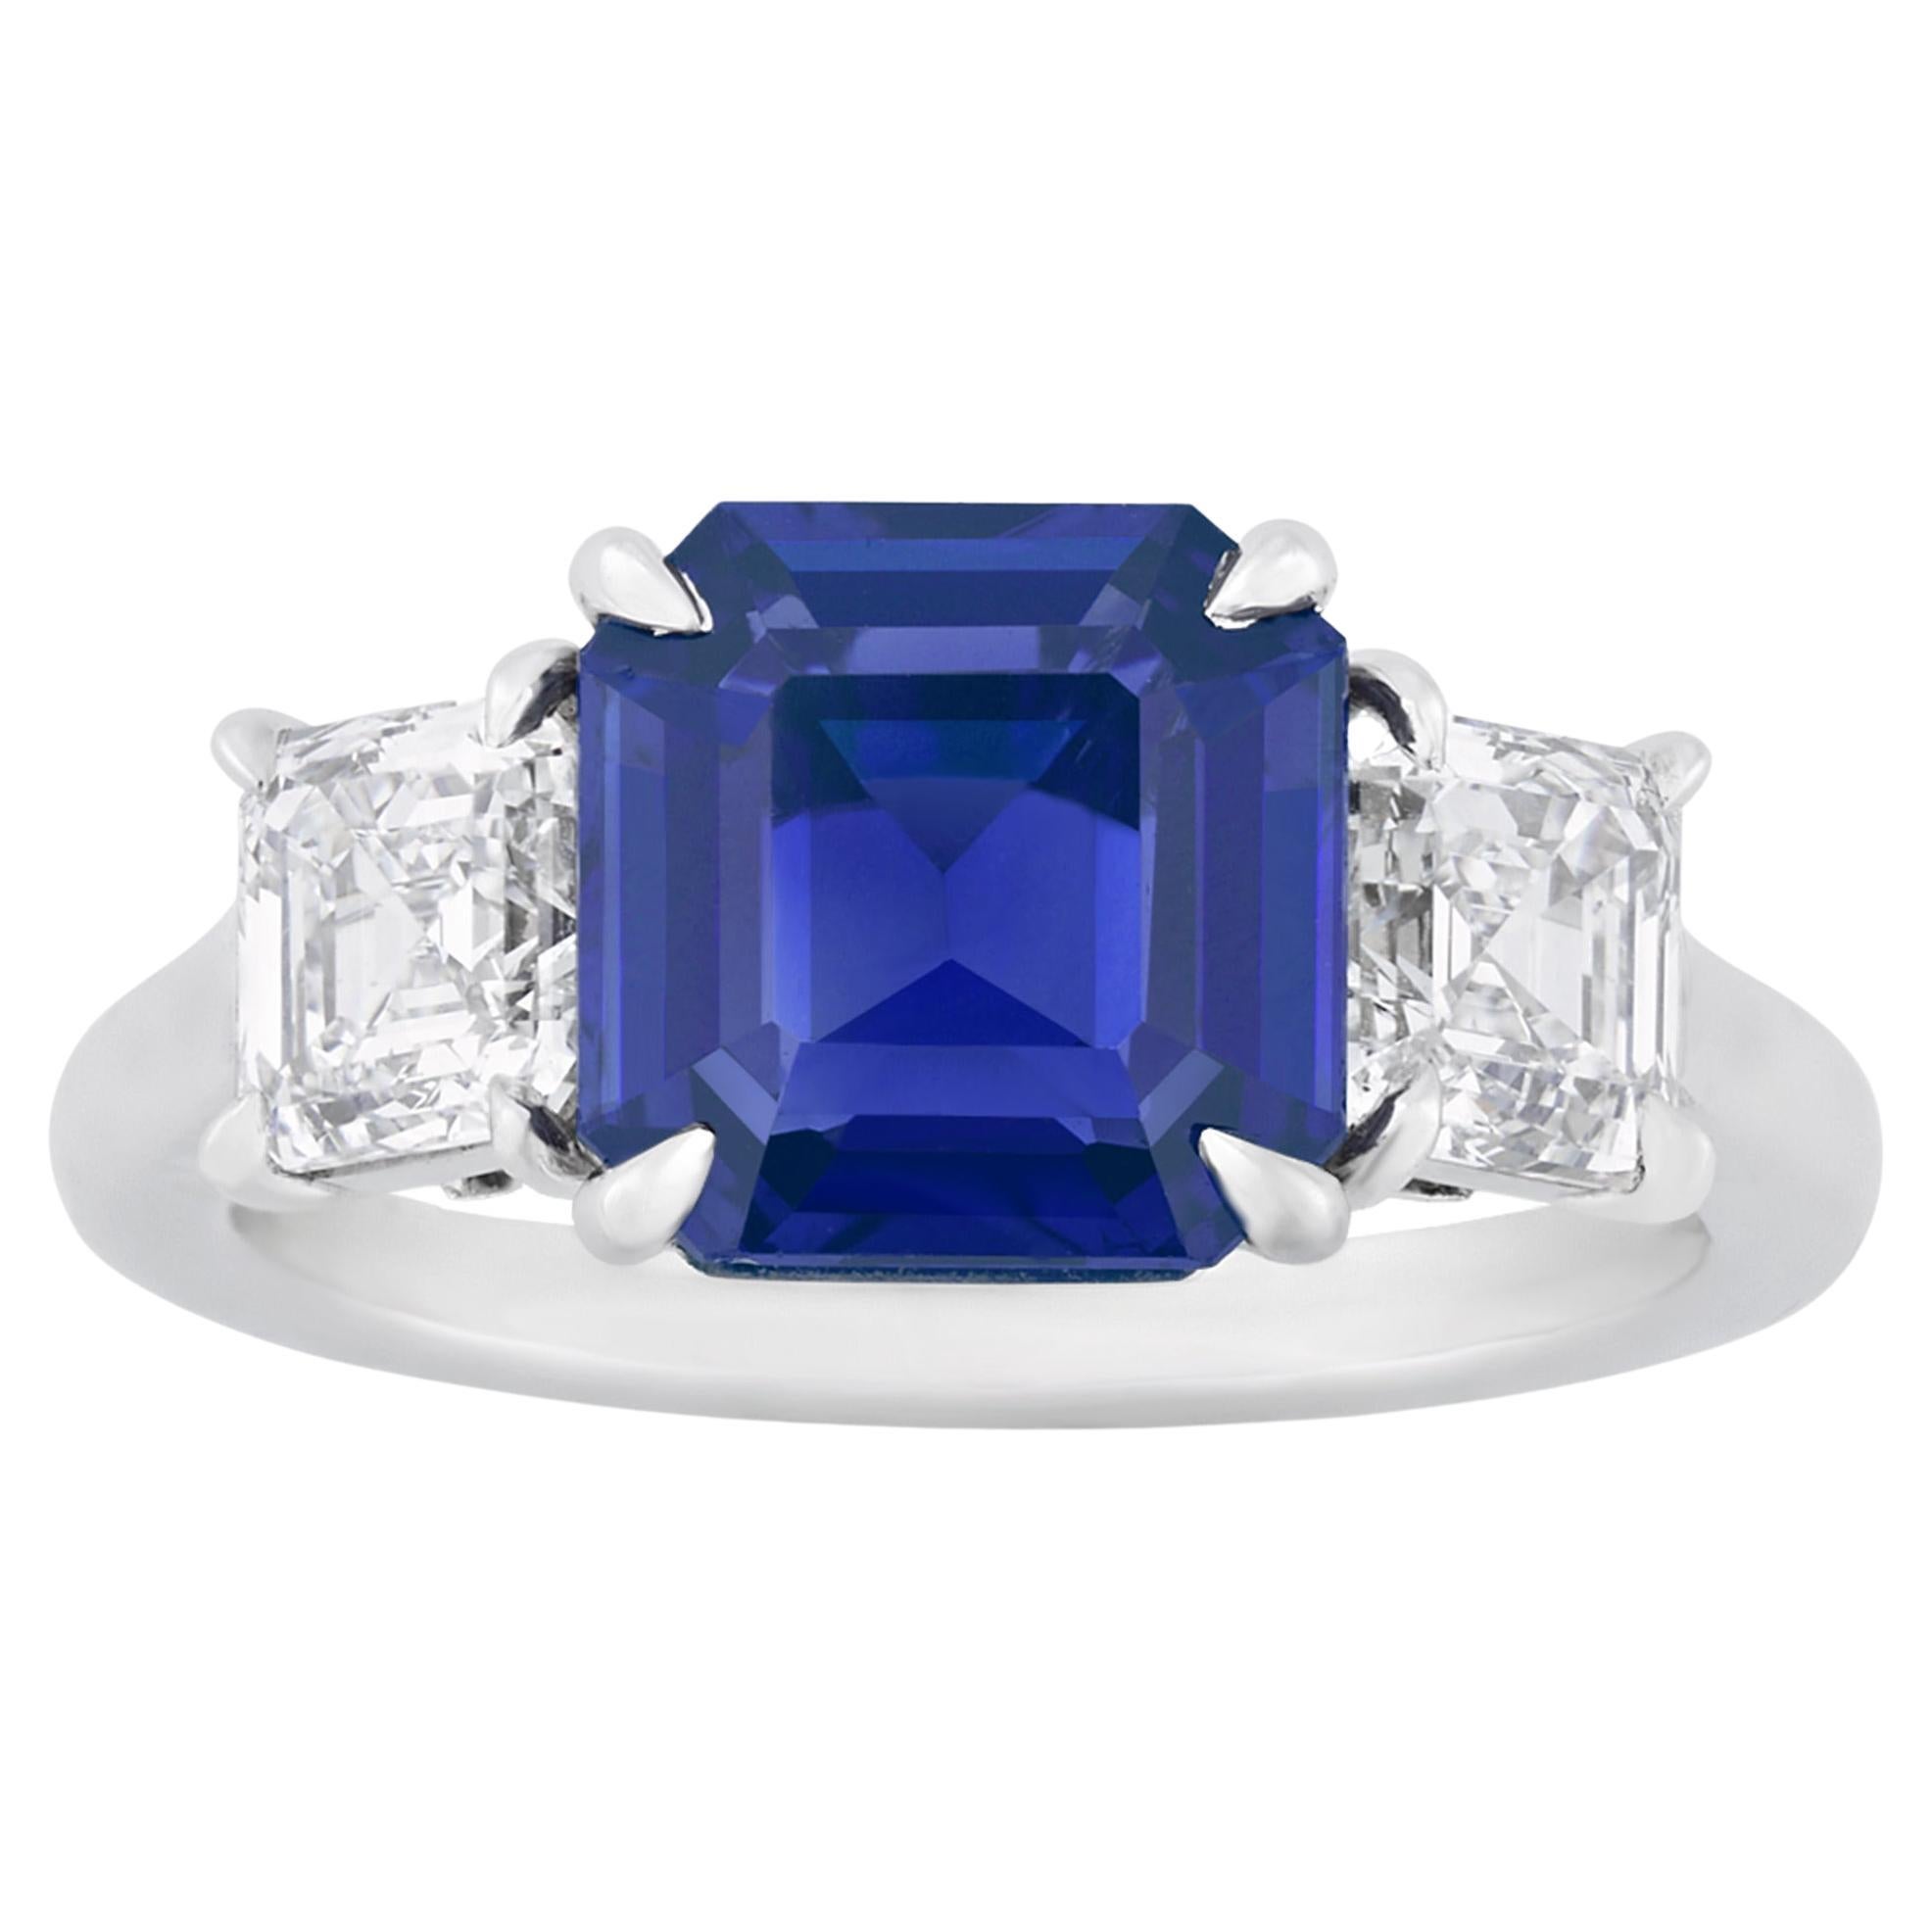 Untreated Kashmir Sapphire Ring, 3.32 Carats For Sale